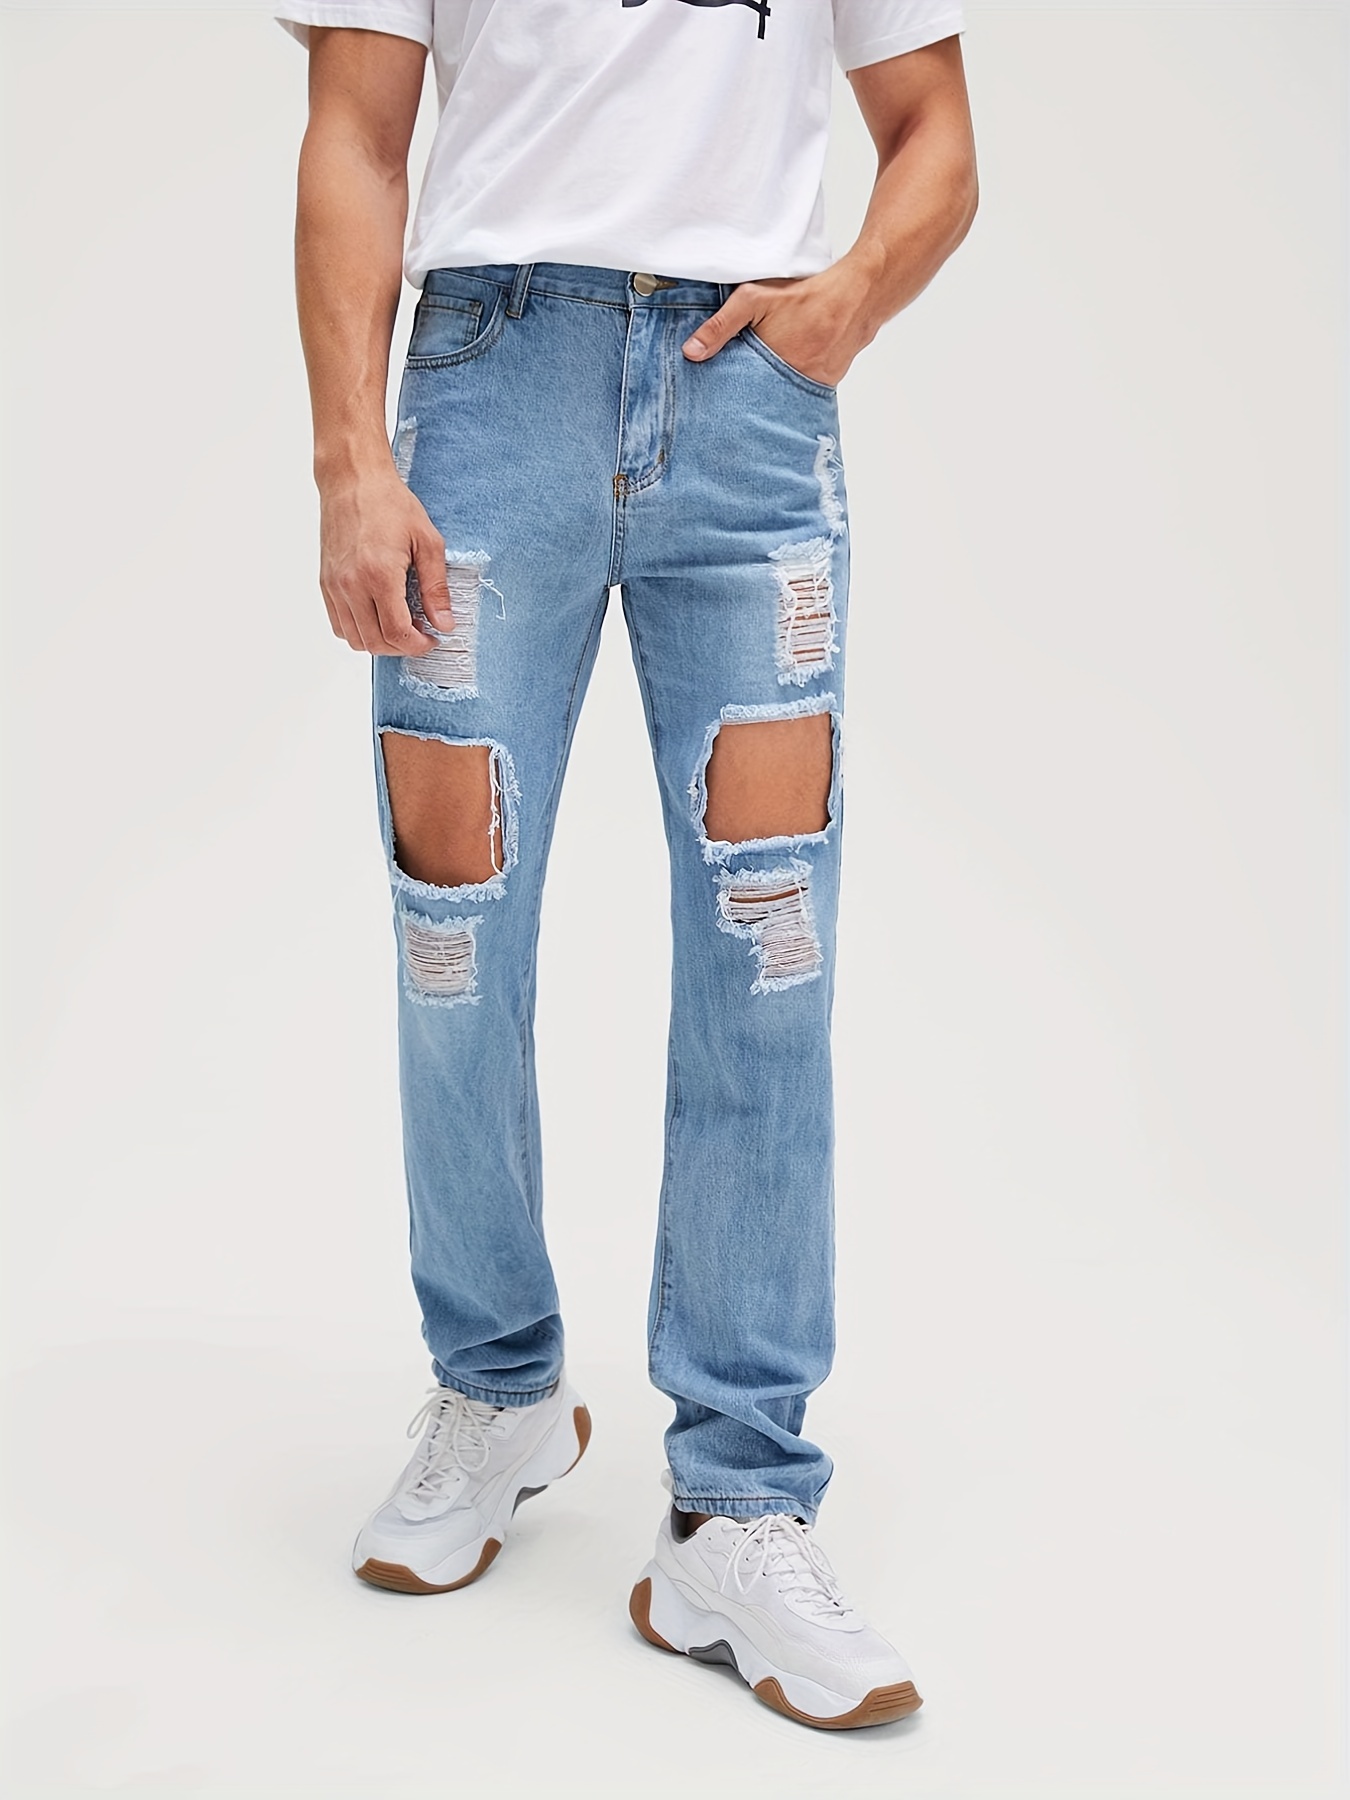 Loose Fit Ripped Jeans, Men's Casual Street Style Distressed Denim Pants  For Spring Summer